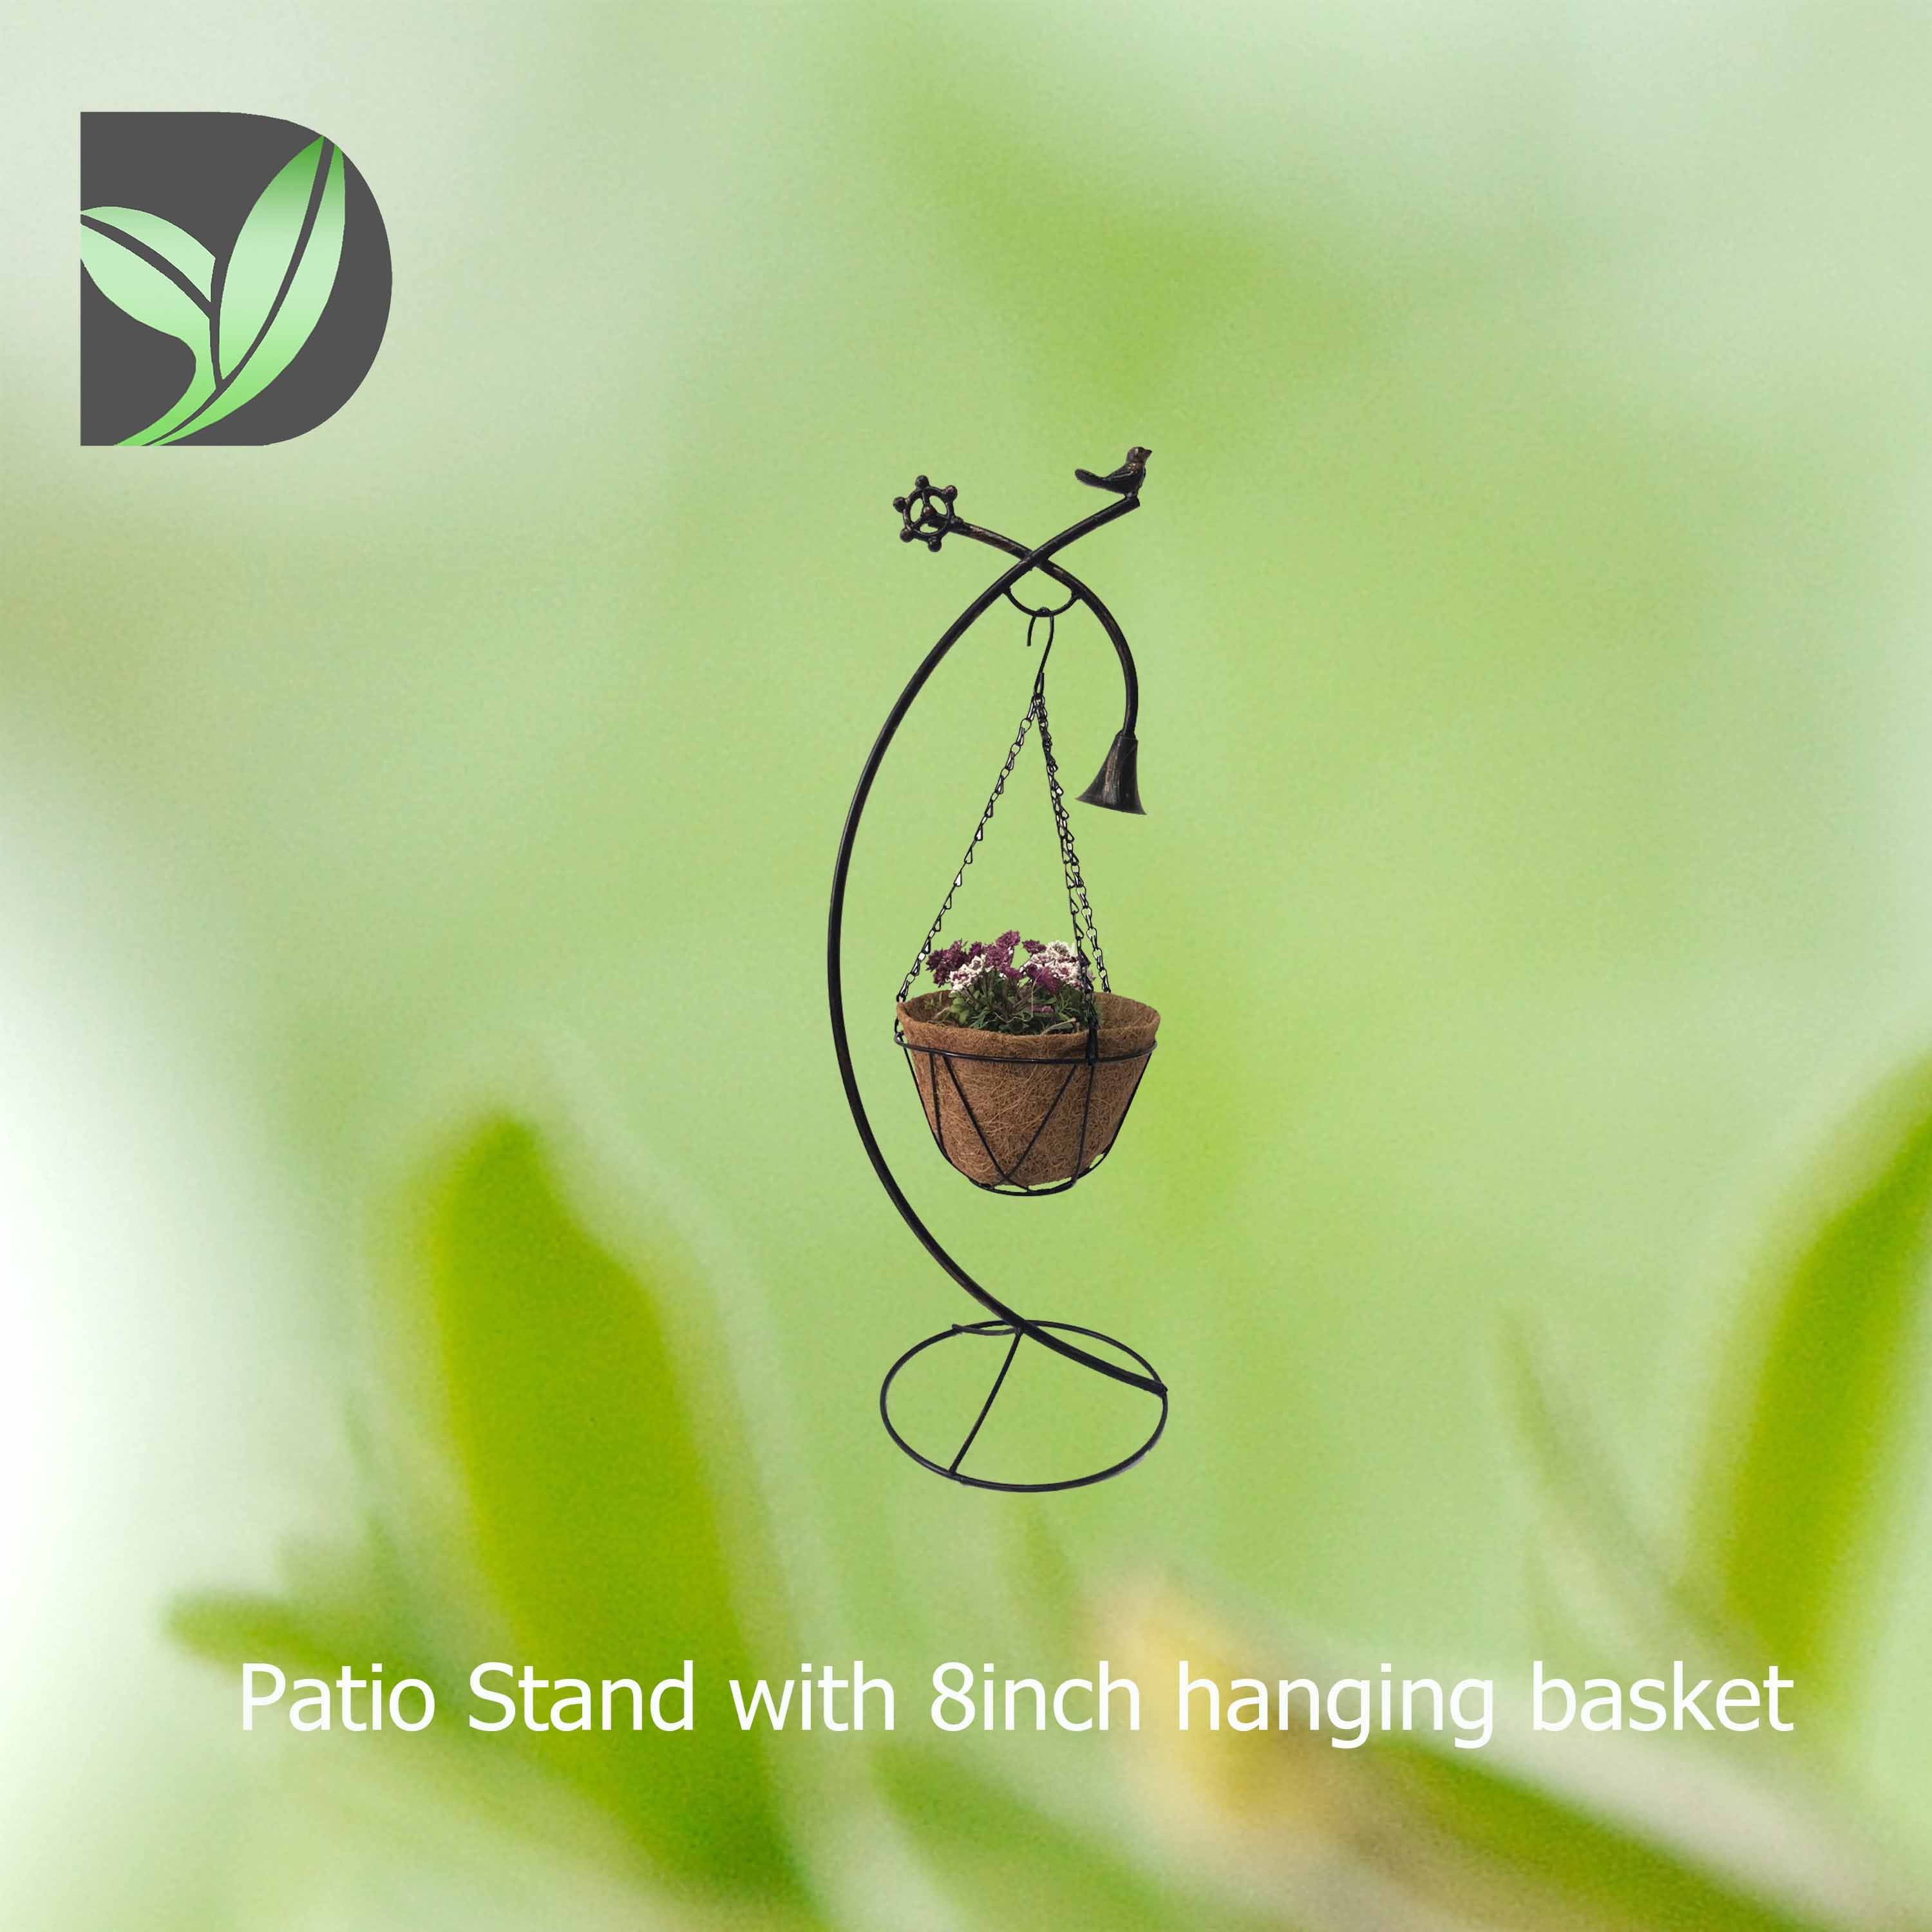 Patio Stand with 8inch hanging basket